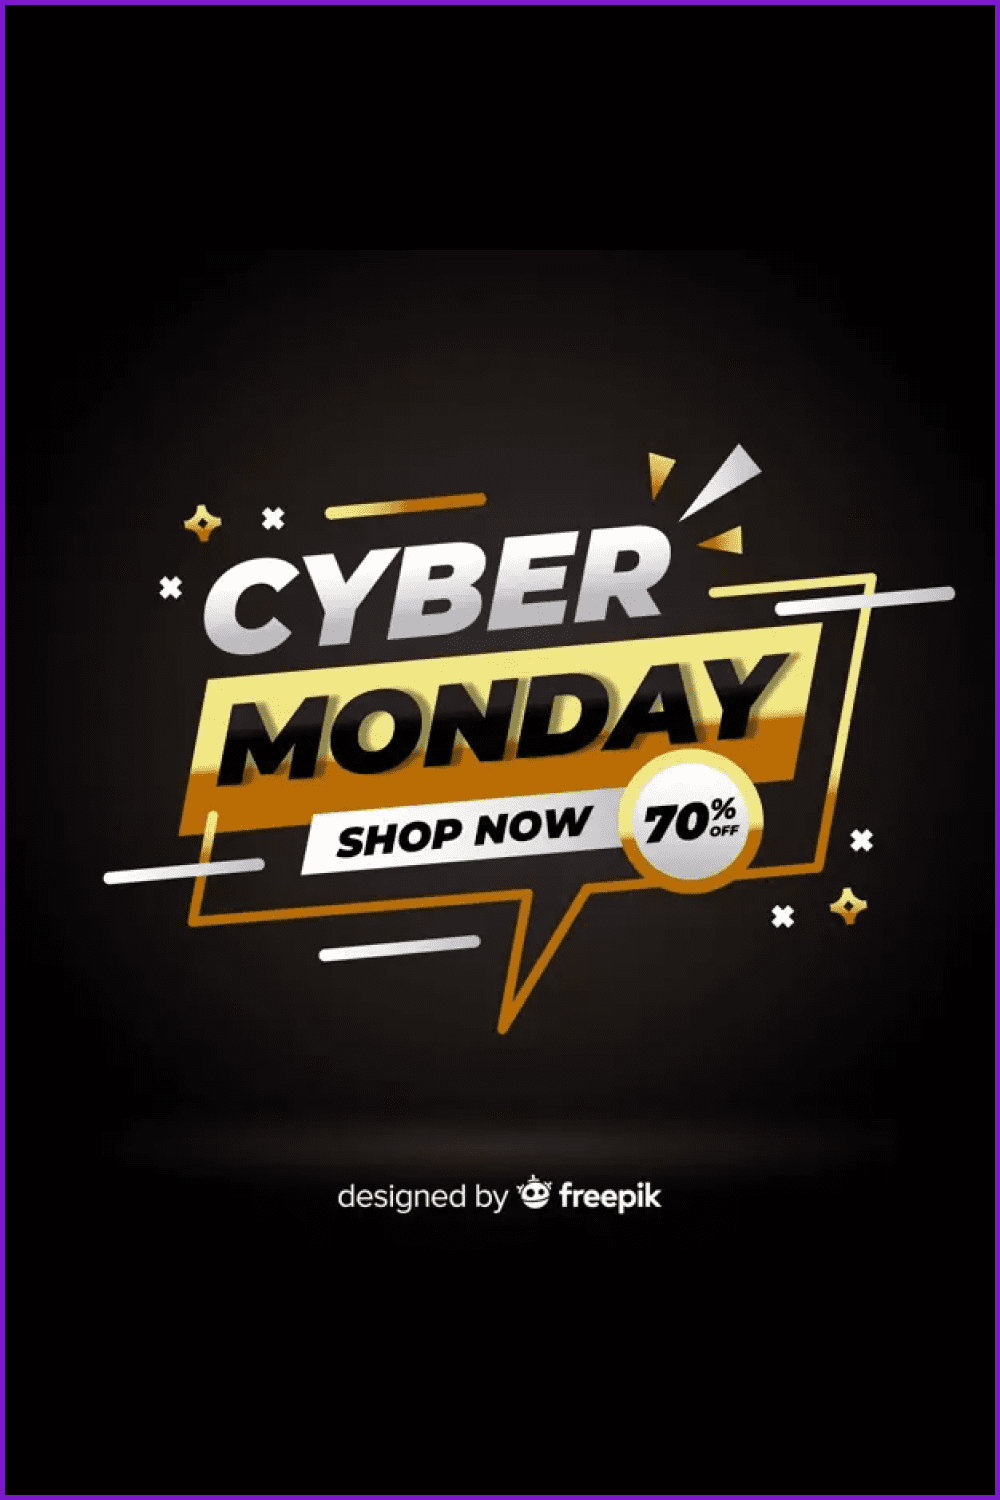 Banner for Cyber Monday with black background and white and gold graphics.